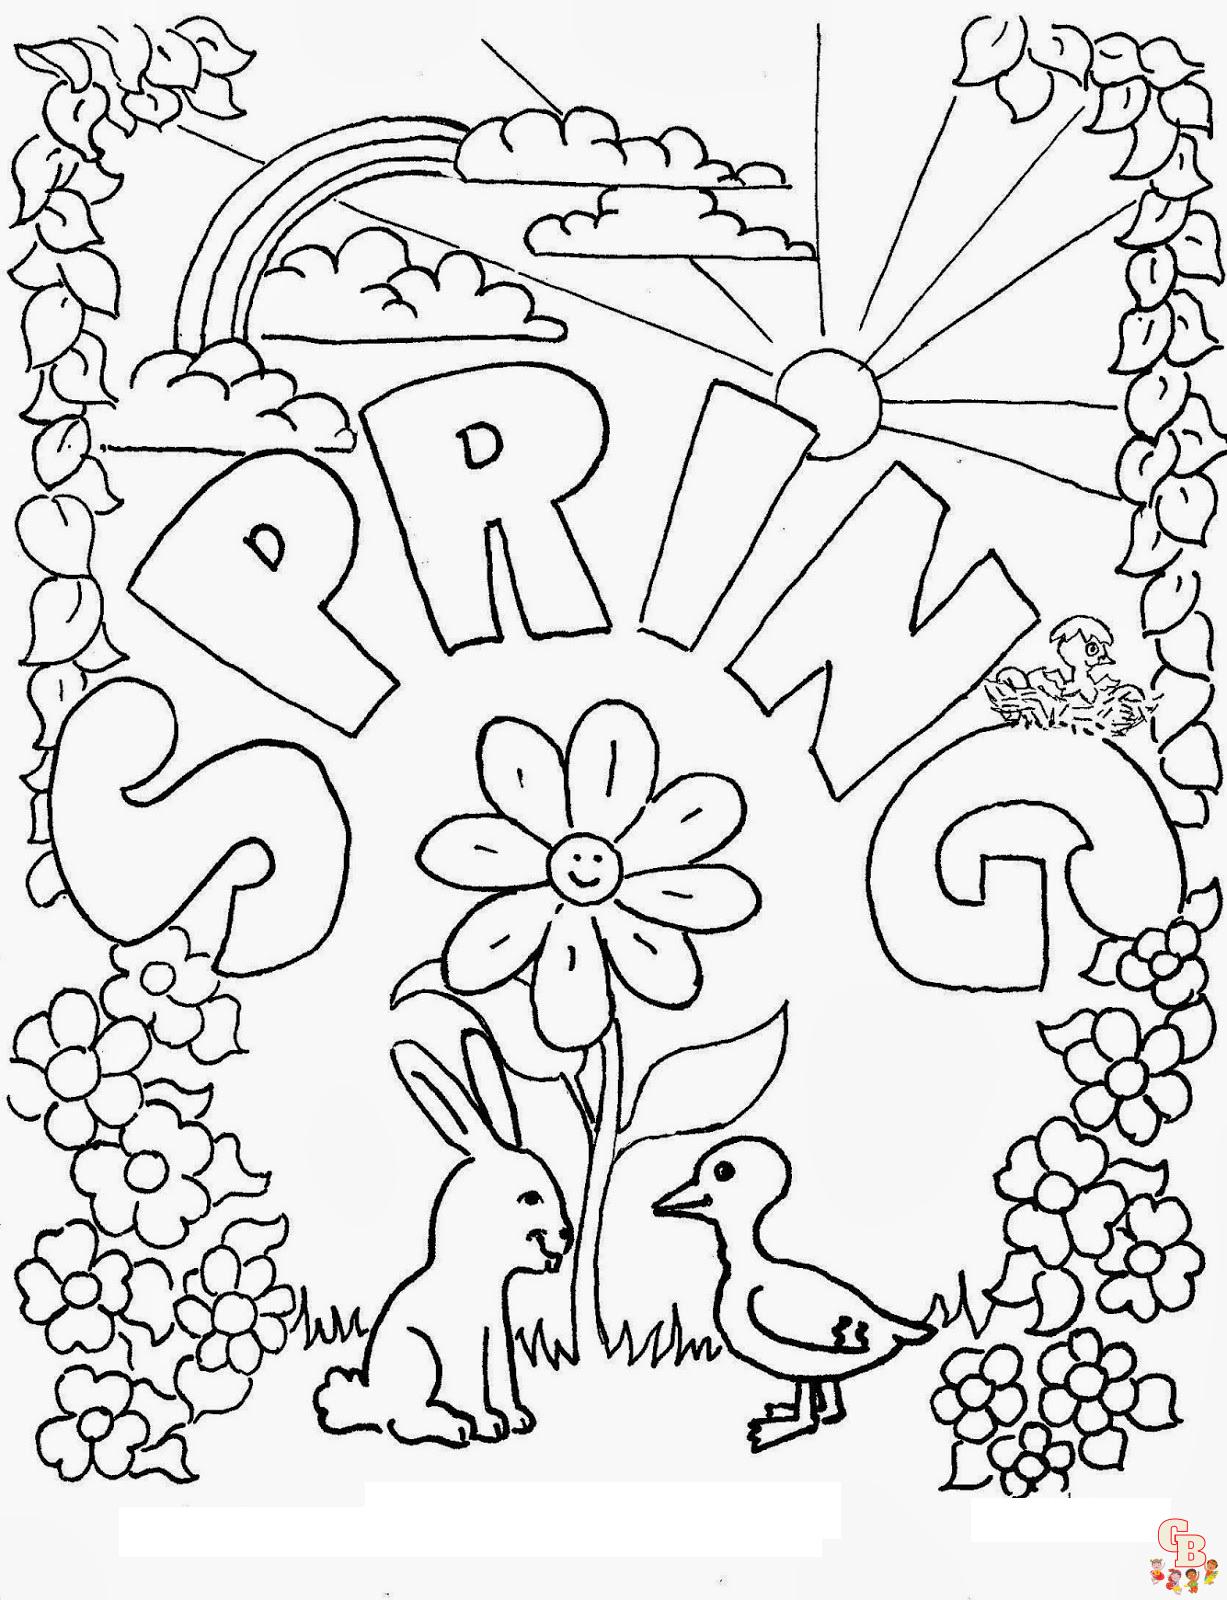 free-printable-first-day-of-spring-coloring-pages-gbcoloring